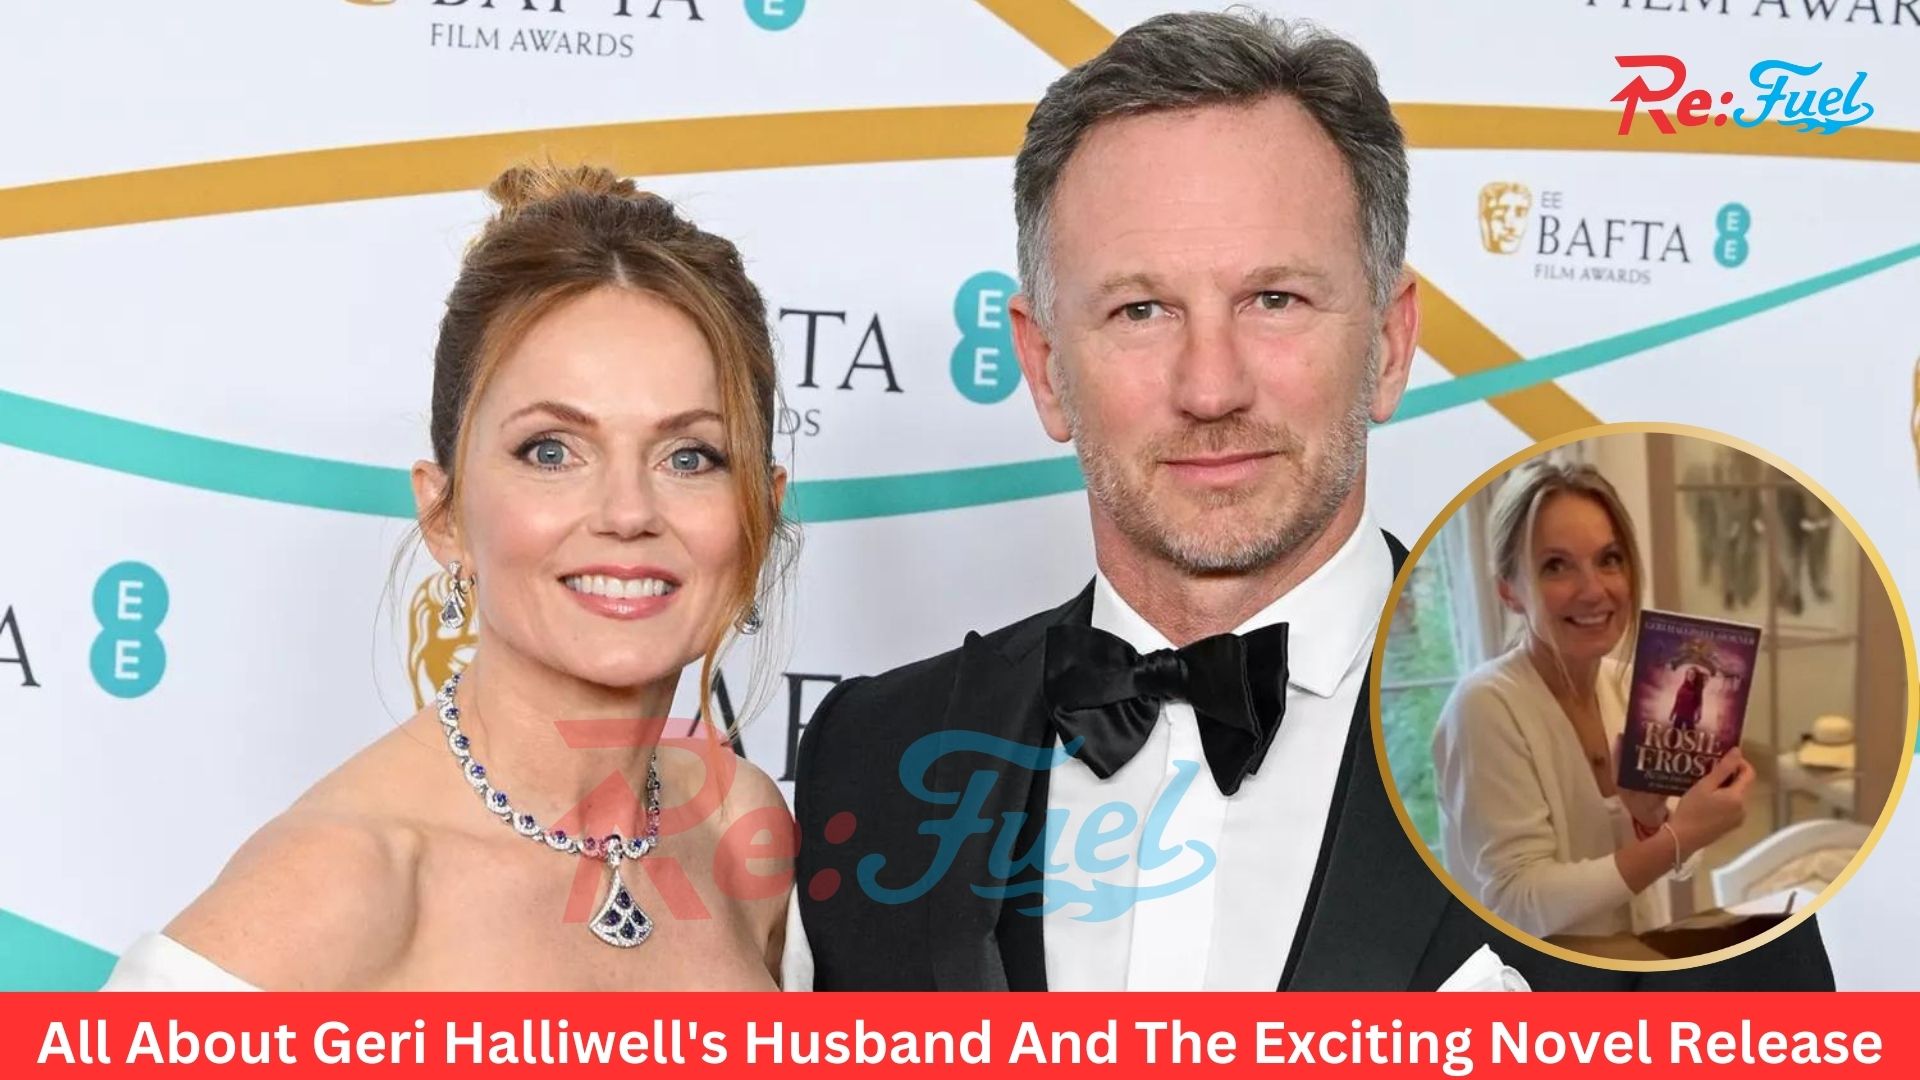 All About Geri Halliwell's Husband And The Exciting Novel Release